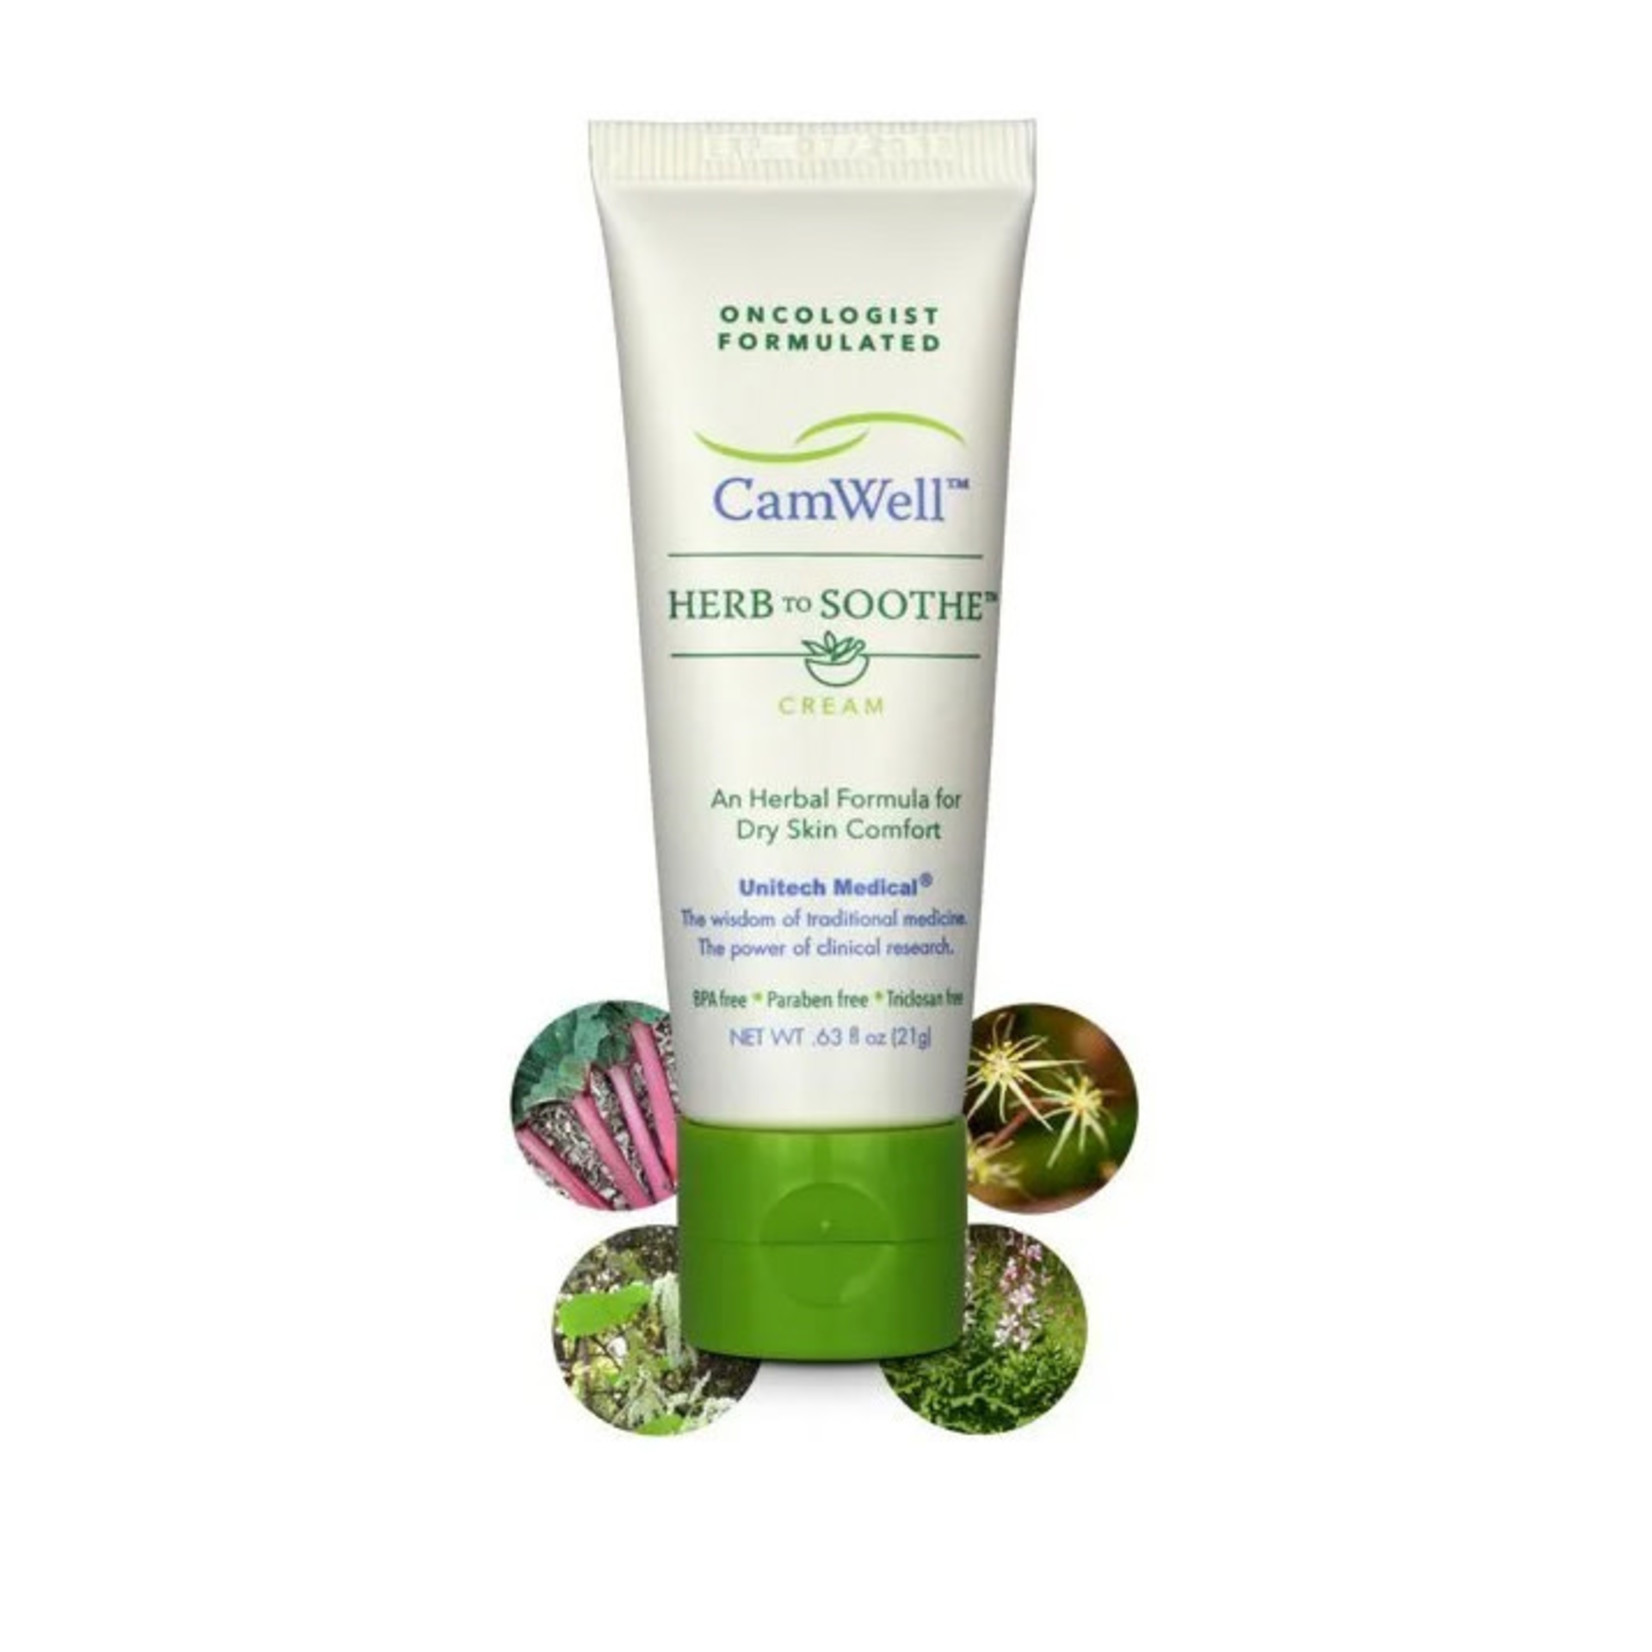 CAMWELL CAMWELL HERB TO SOOTHE CREAM 21G (3 PACK)